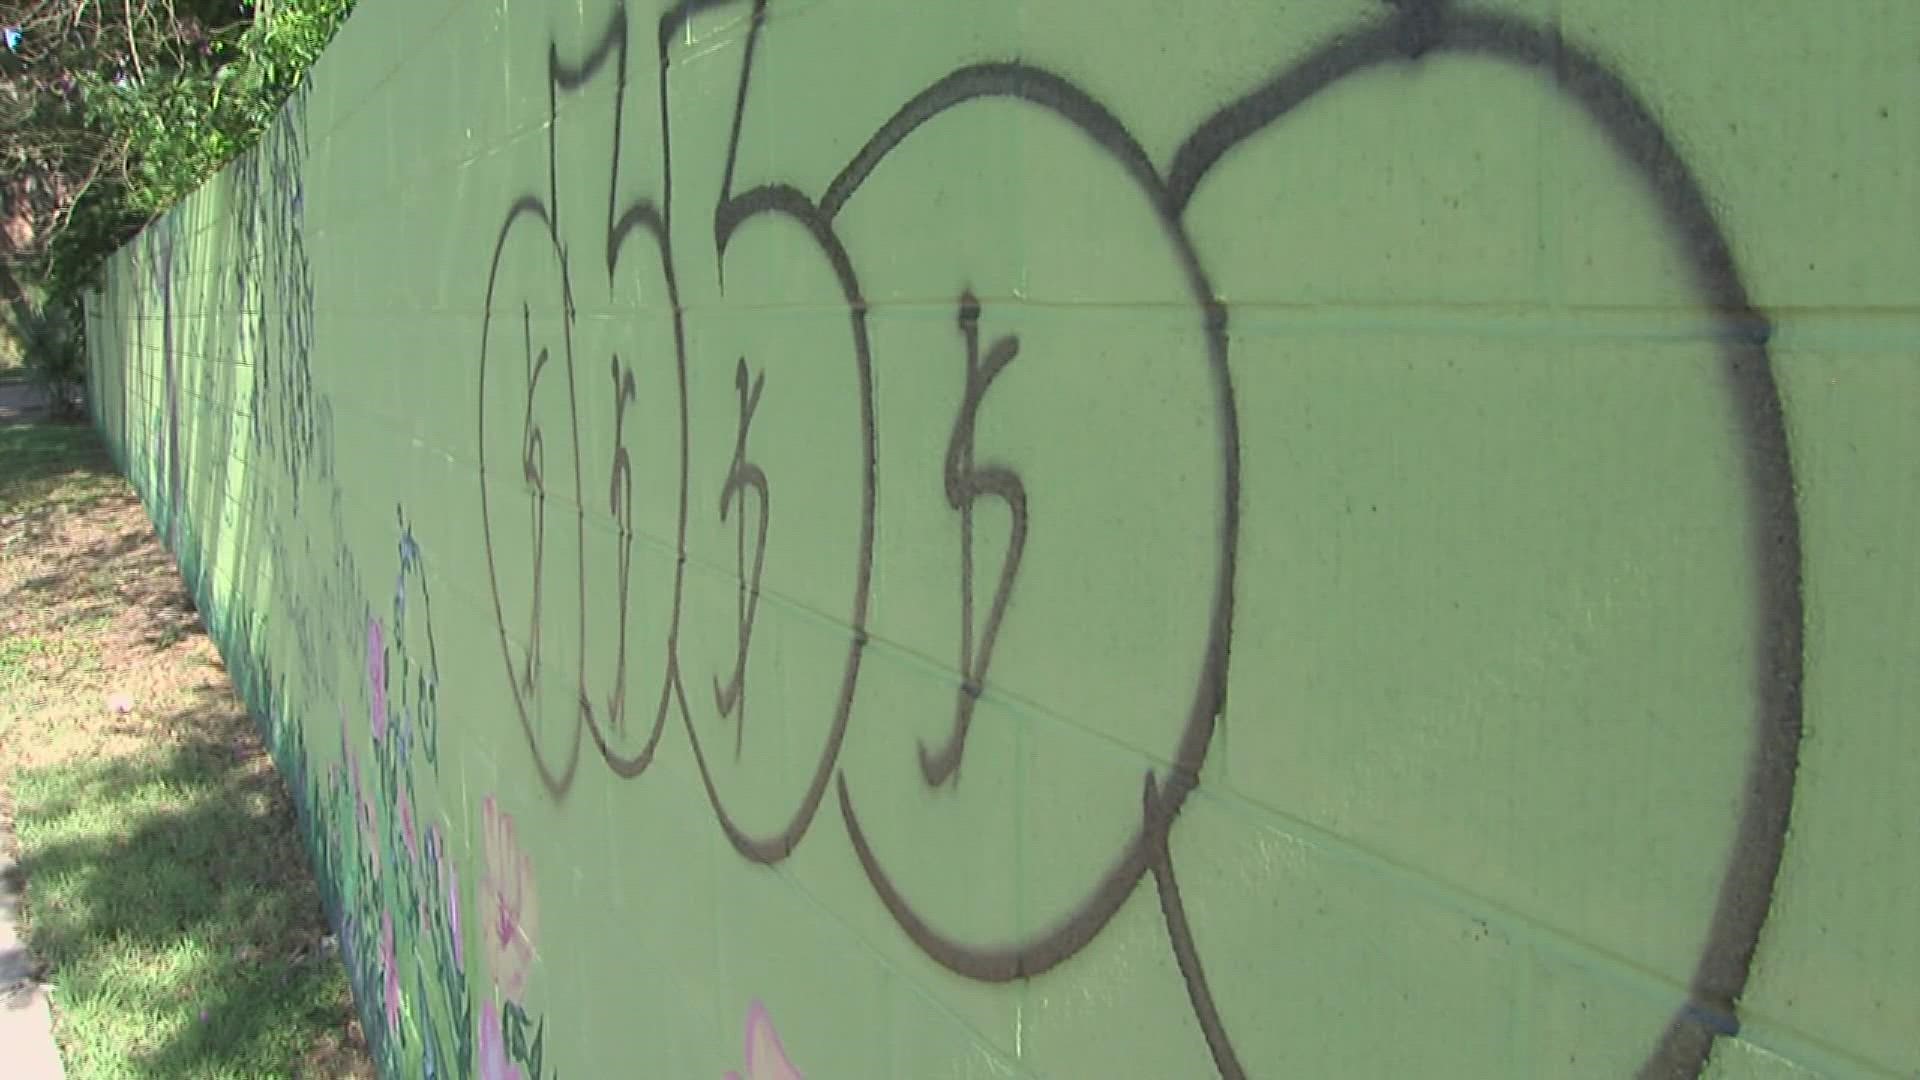 There are no leads on who may have vandalized a popular Calder Ave mural over the past weekend but the artist and homeowners are moving forward to make repairs.